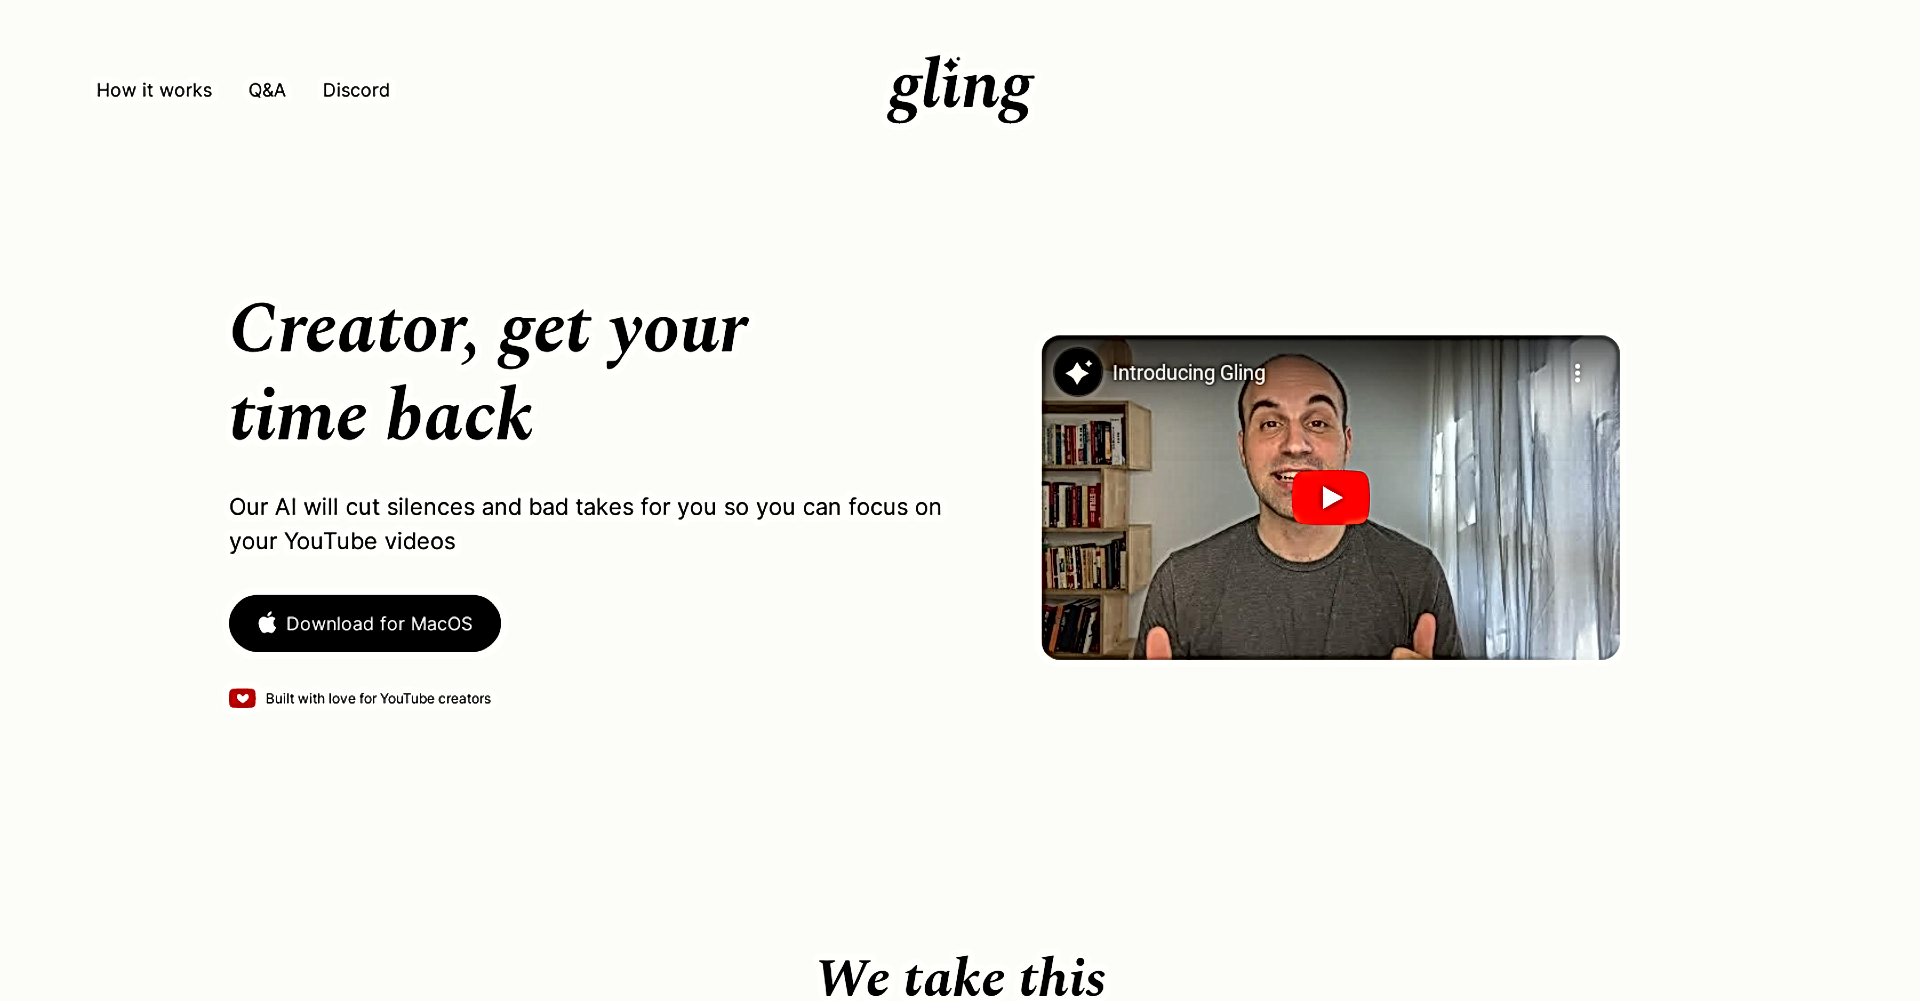 Gling featured